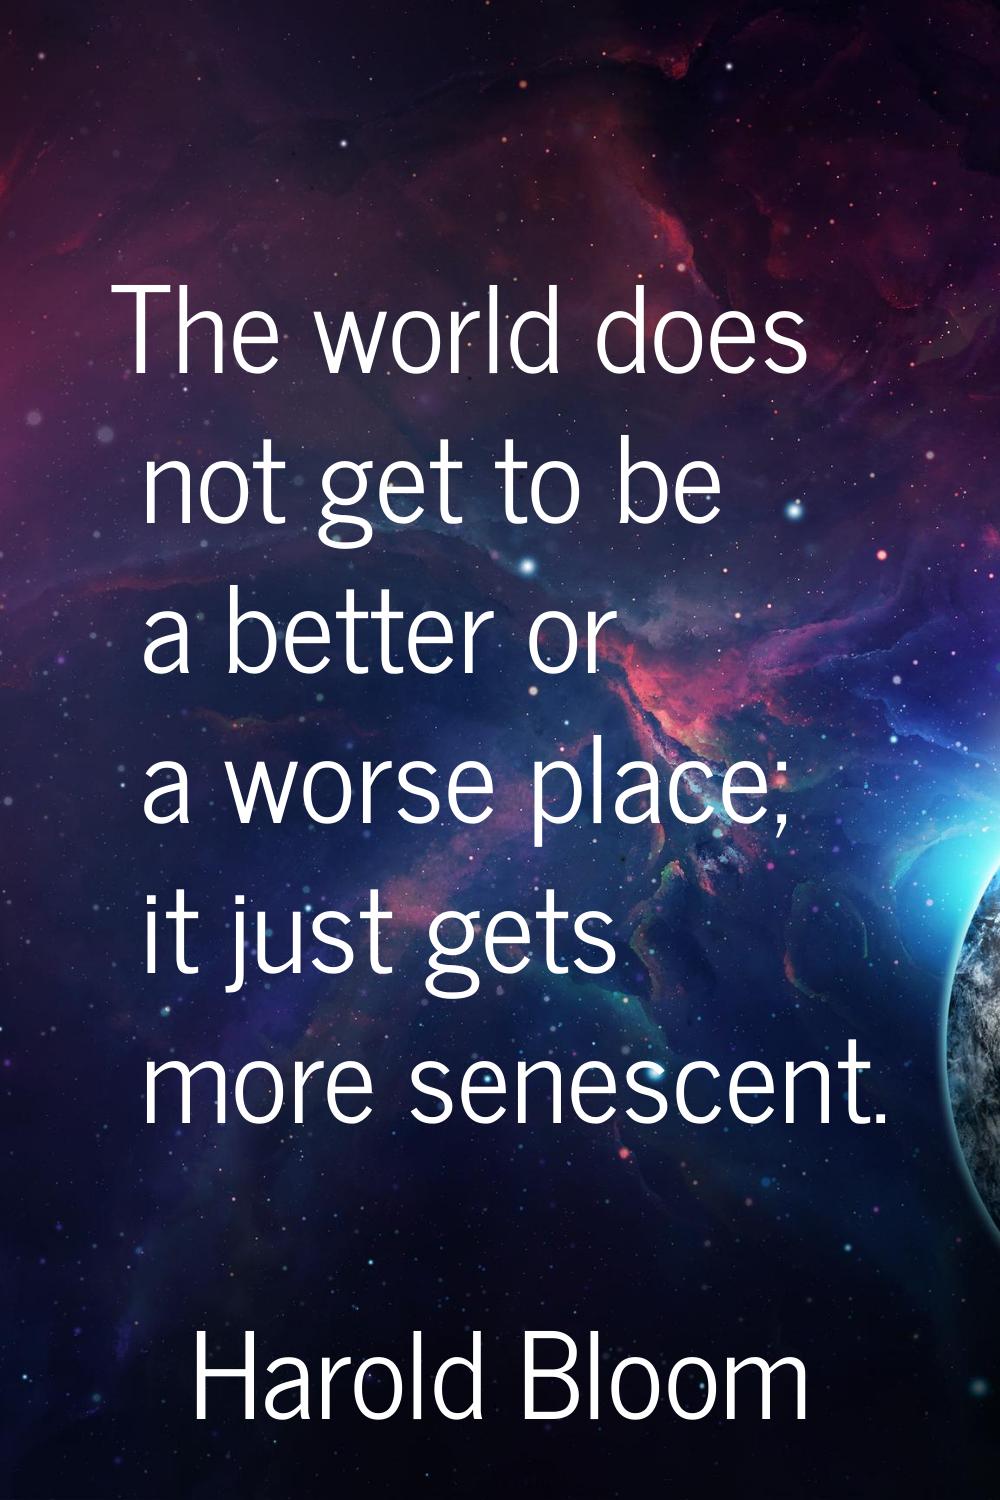 The world does not get to be a better or a worse place; it just gets more senescent.